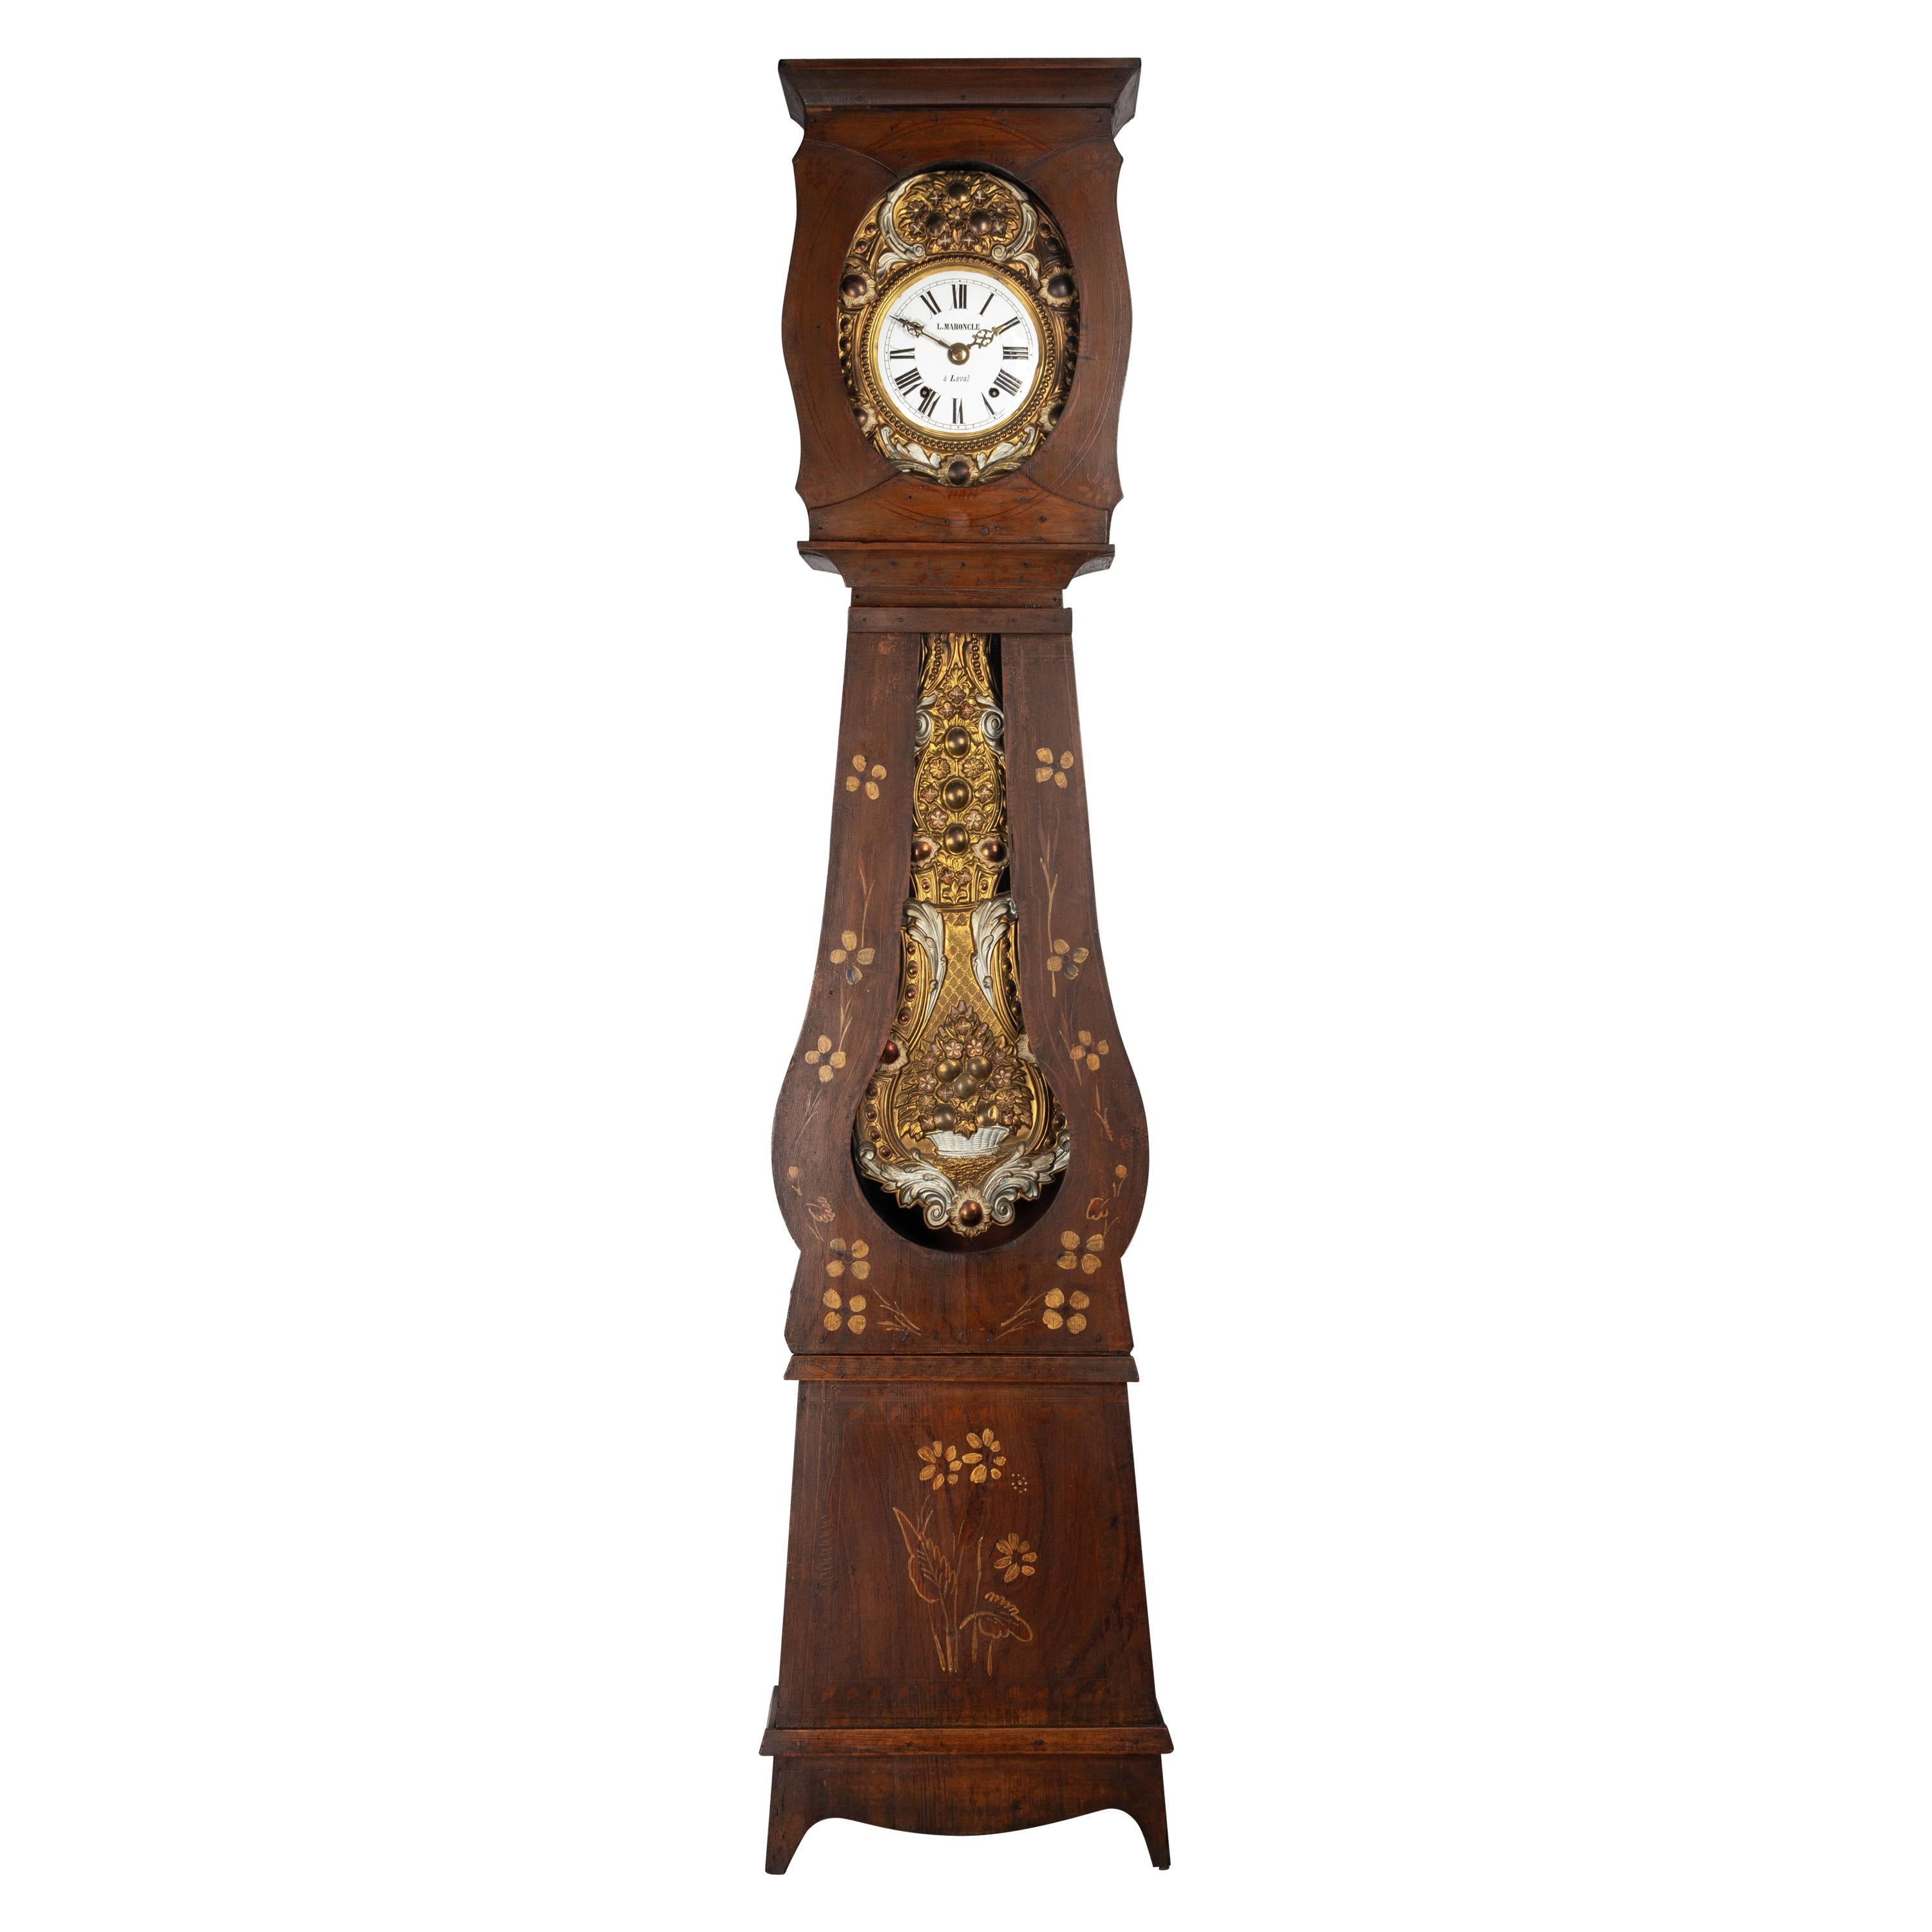 French Comtoise Grandfather Clock or Comtoise